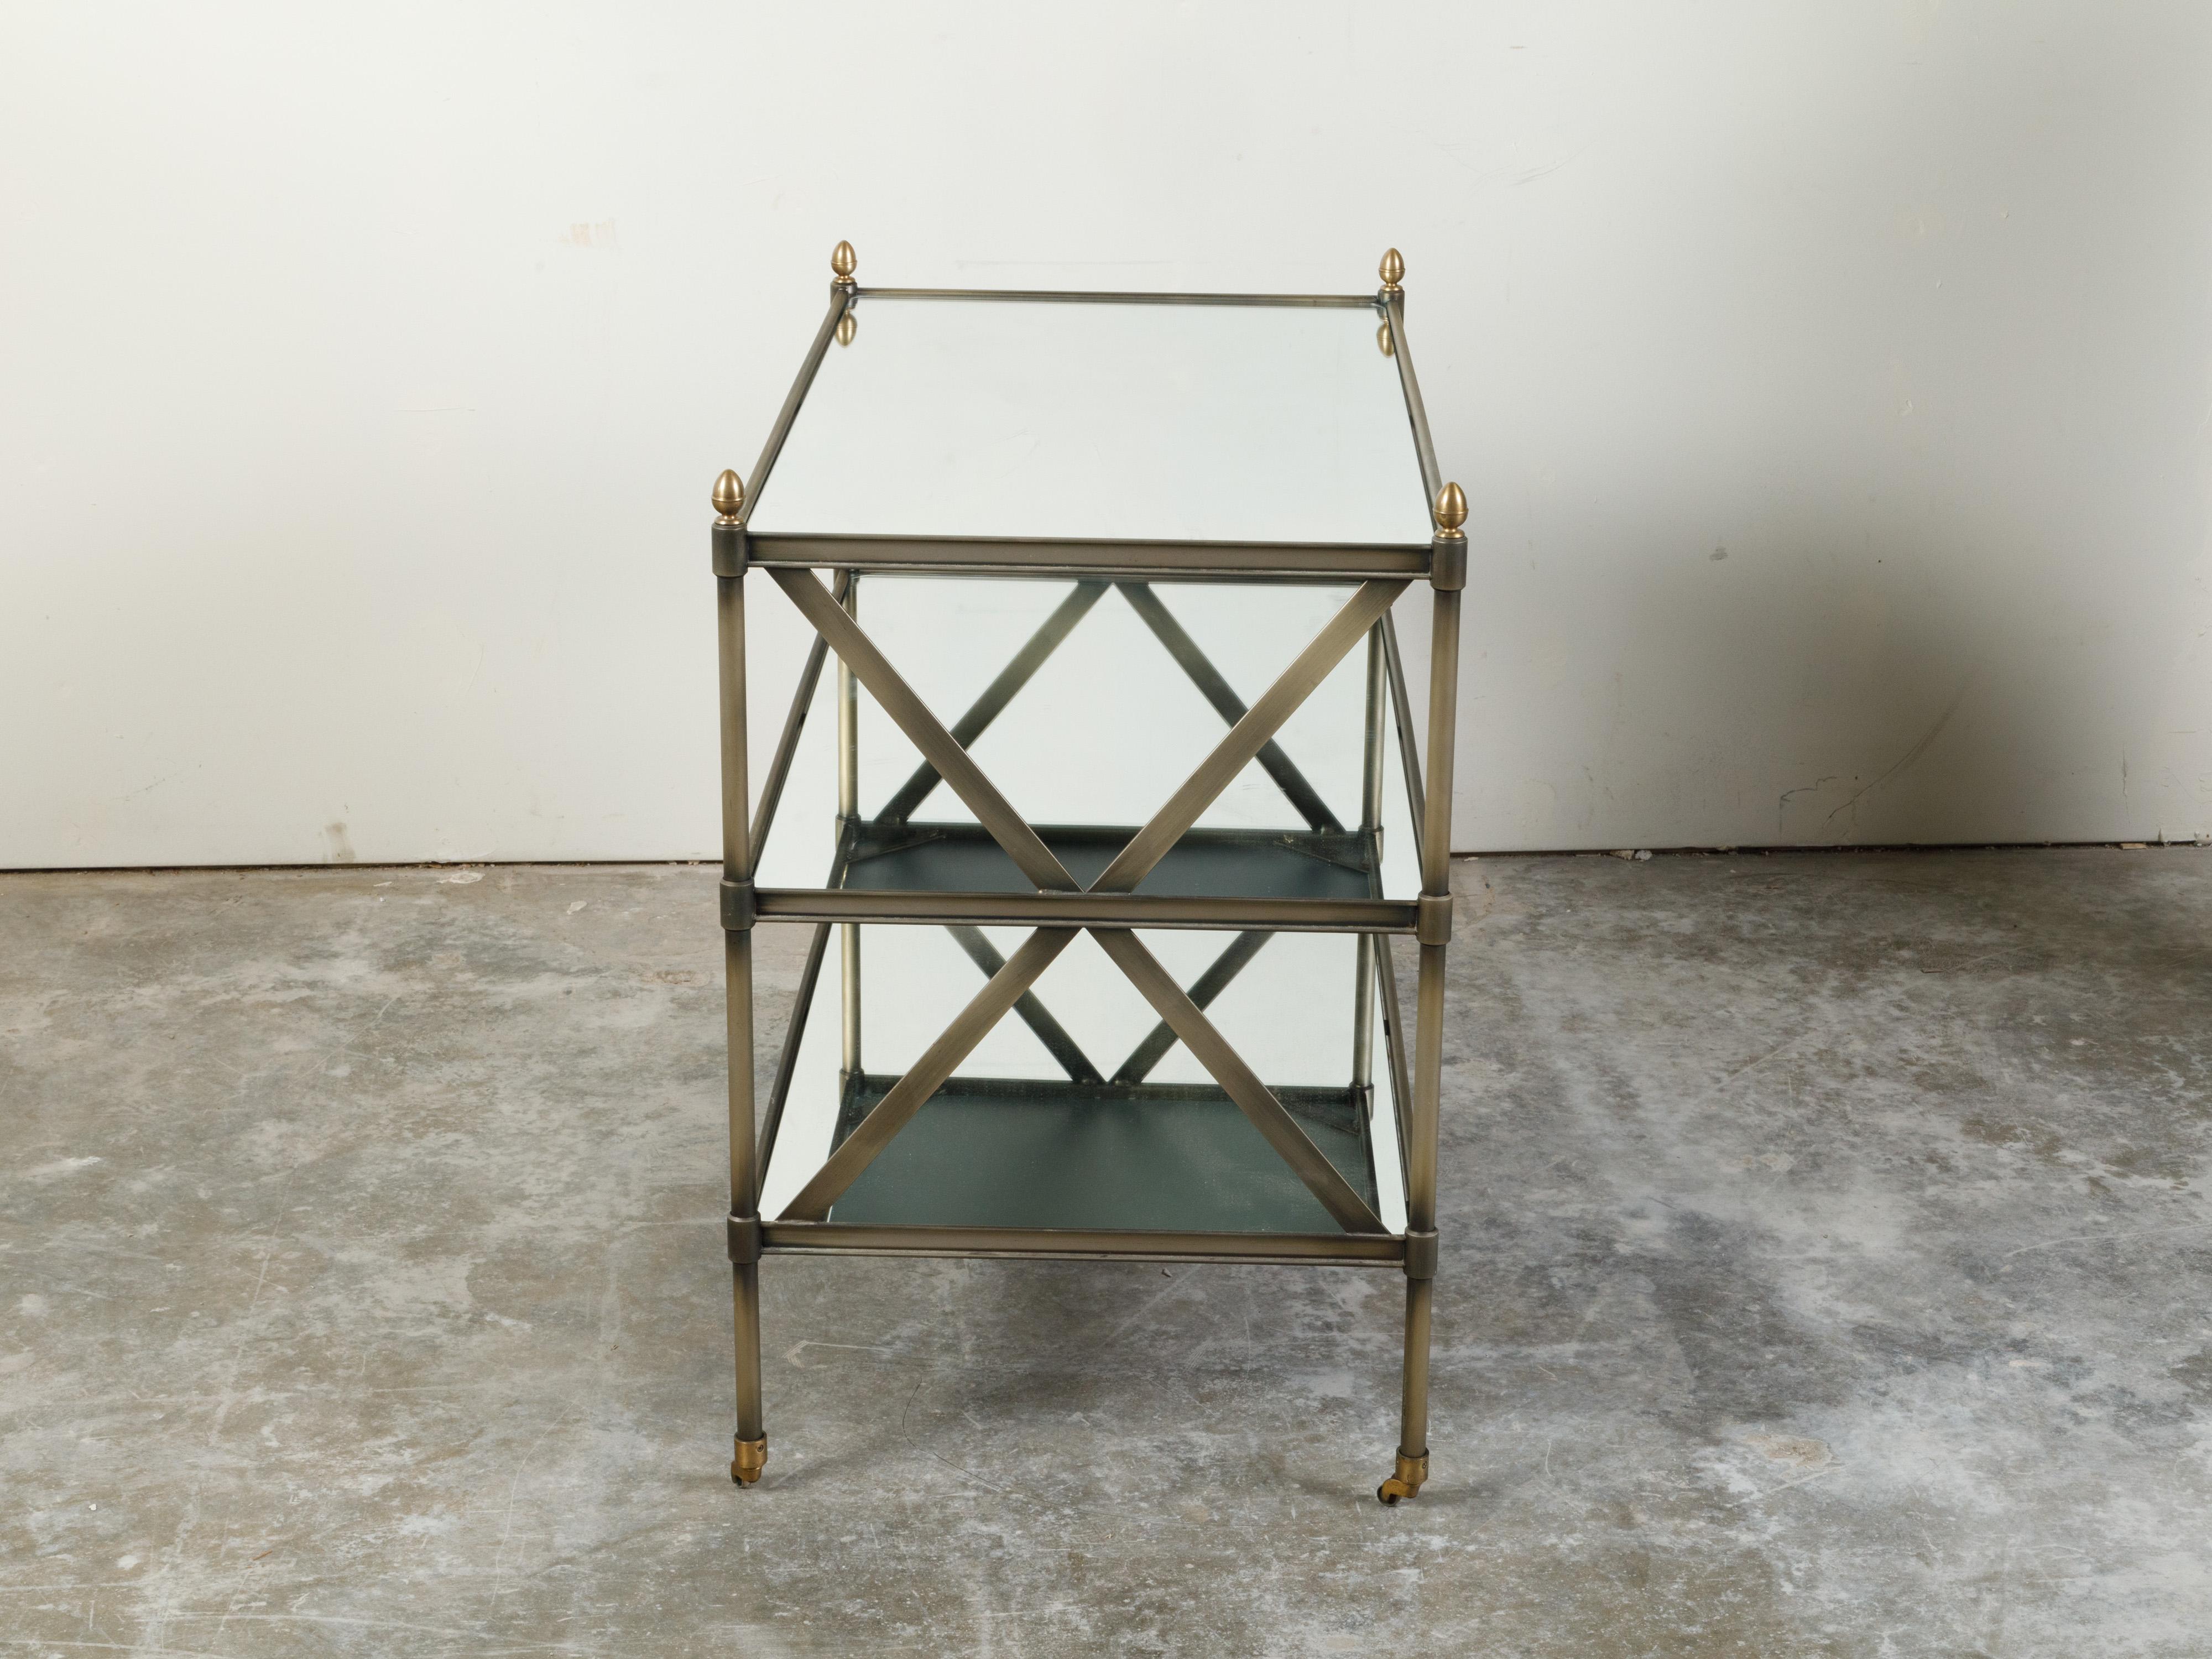 Italian Midcentury Patinated Metal Trolley with Mirrored Shelves and Casters In Good Condition For Sale In Atlanta, GA